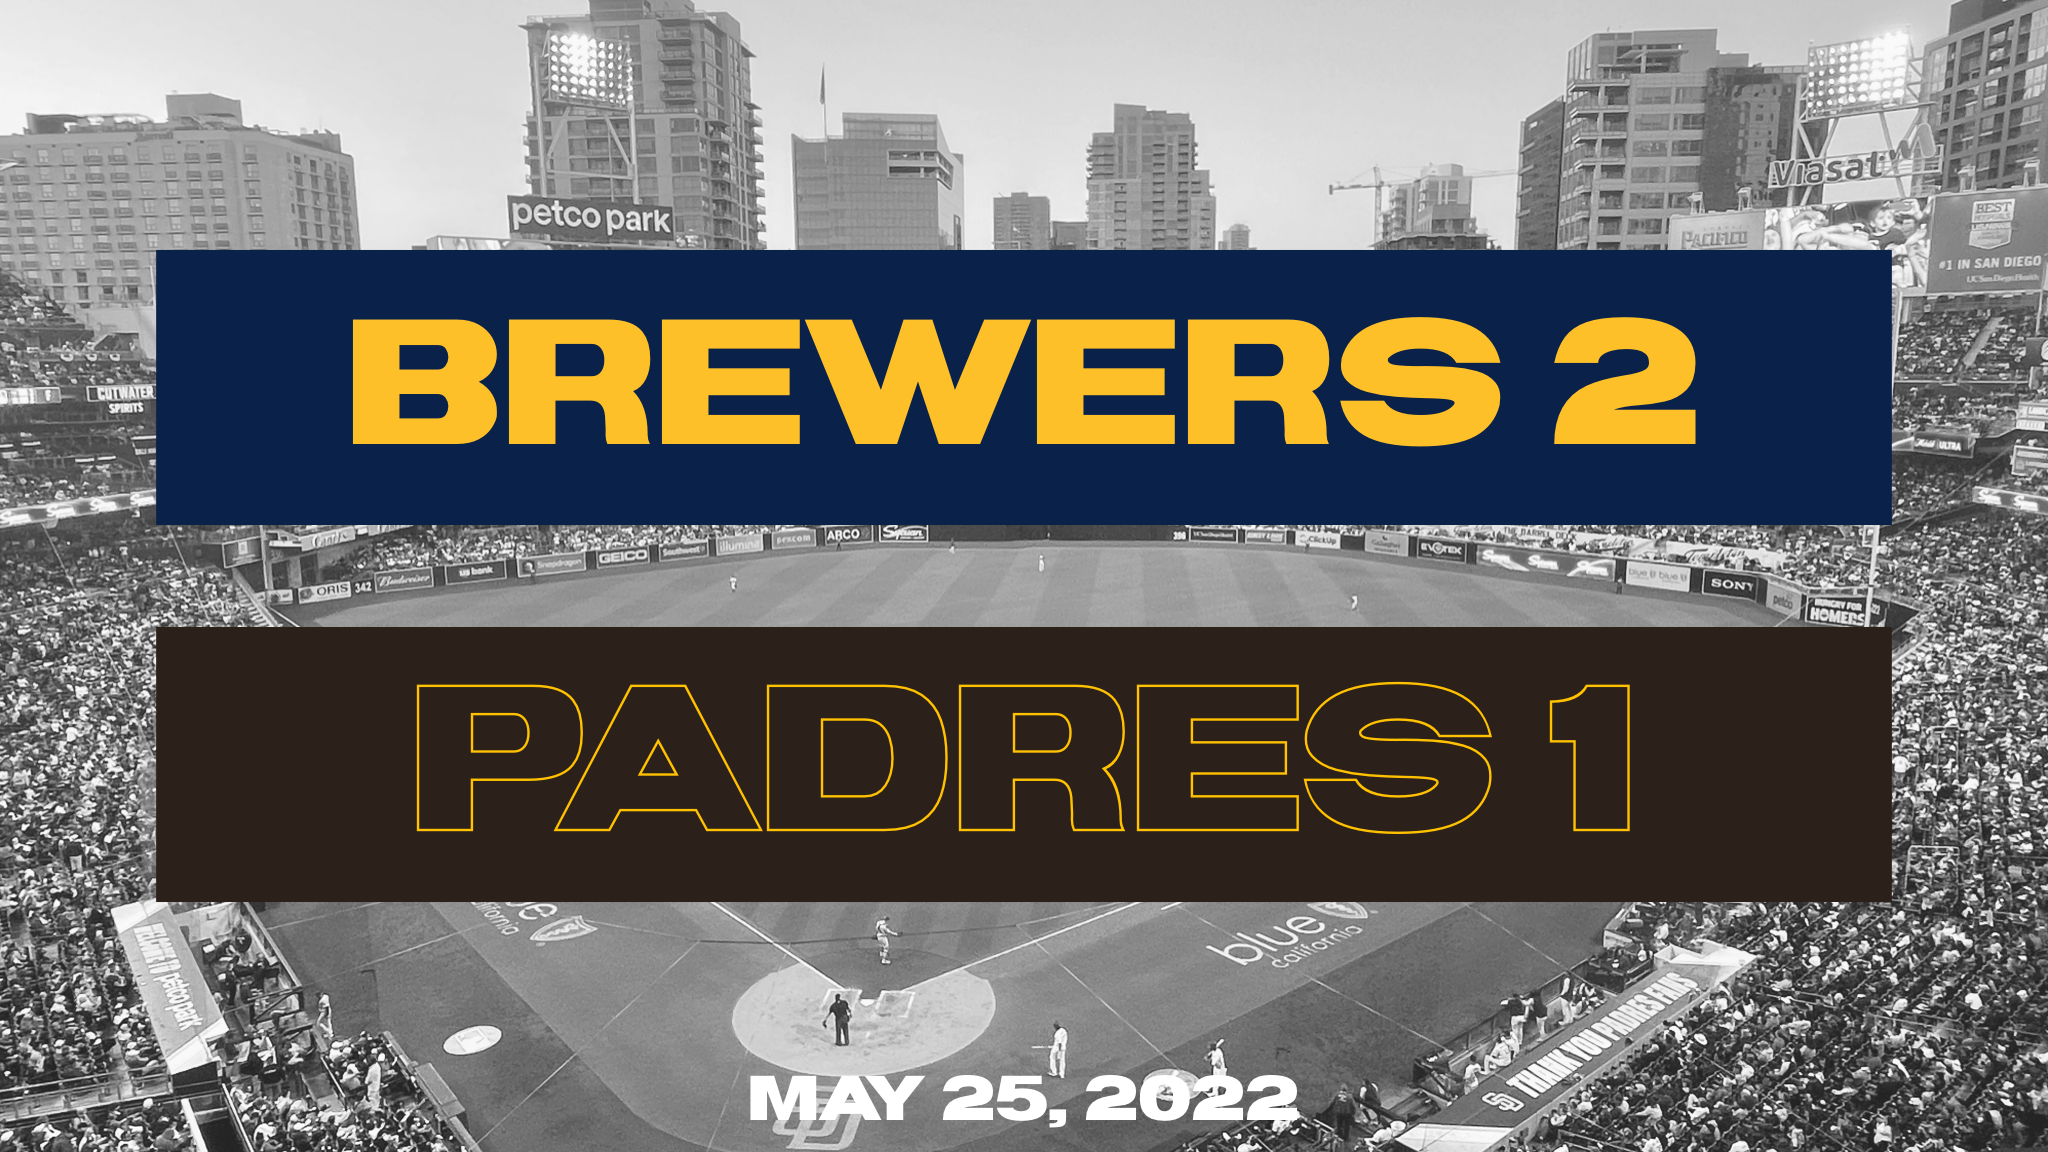 Final: Brewers 2, Padres 1. May 25, 2022